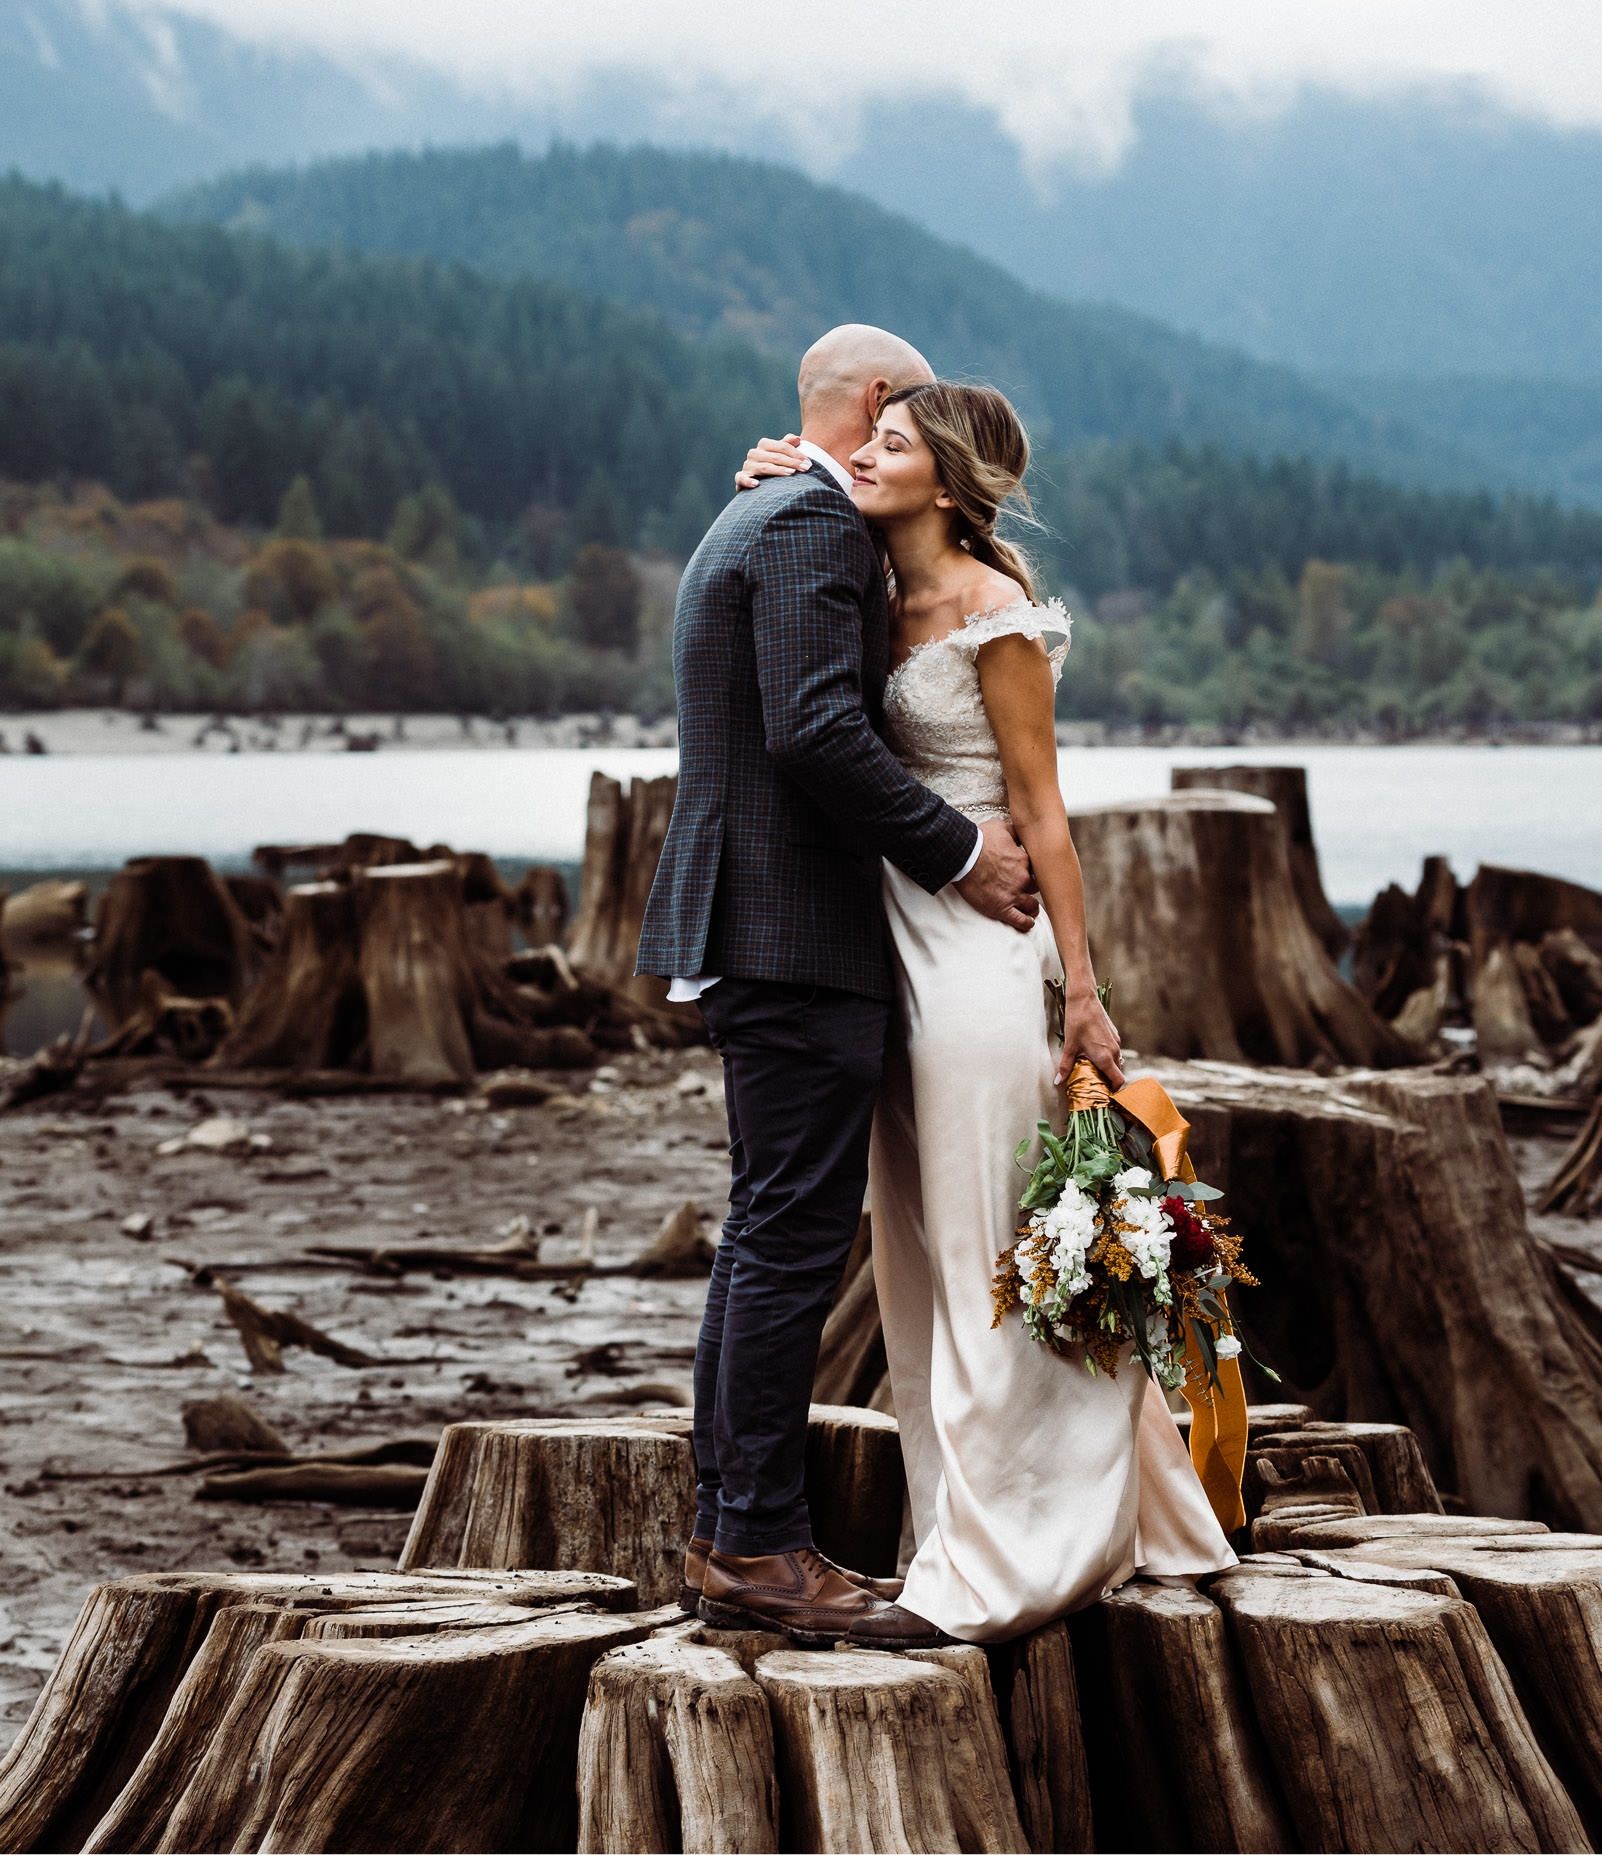 Washington State elopement packages include location scouting